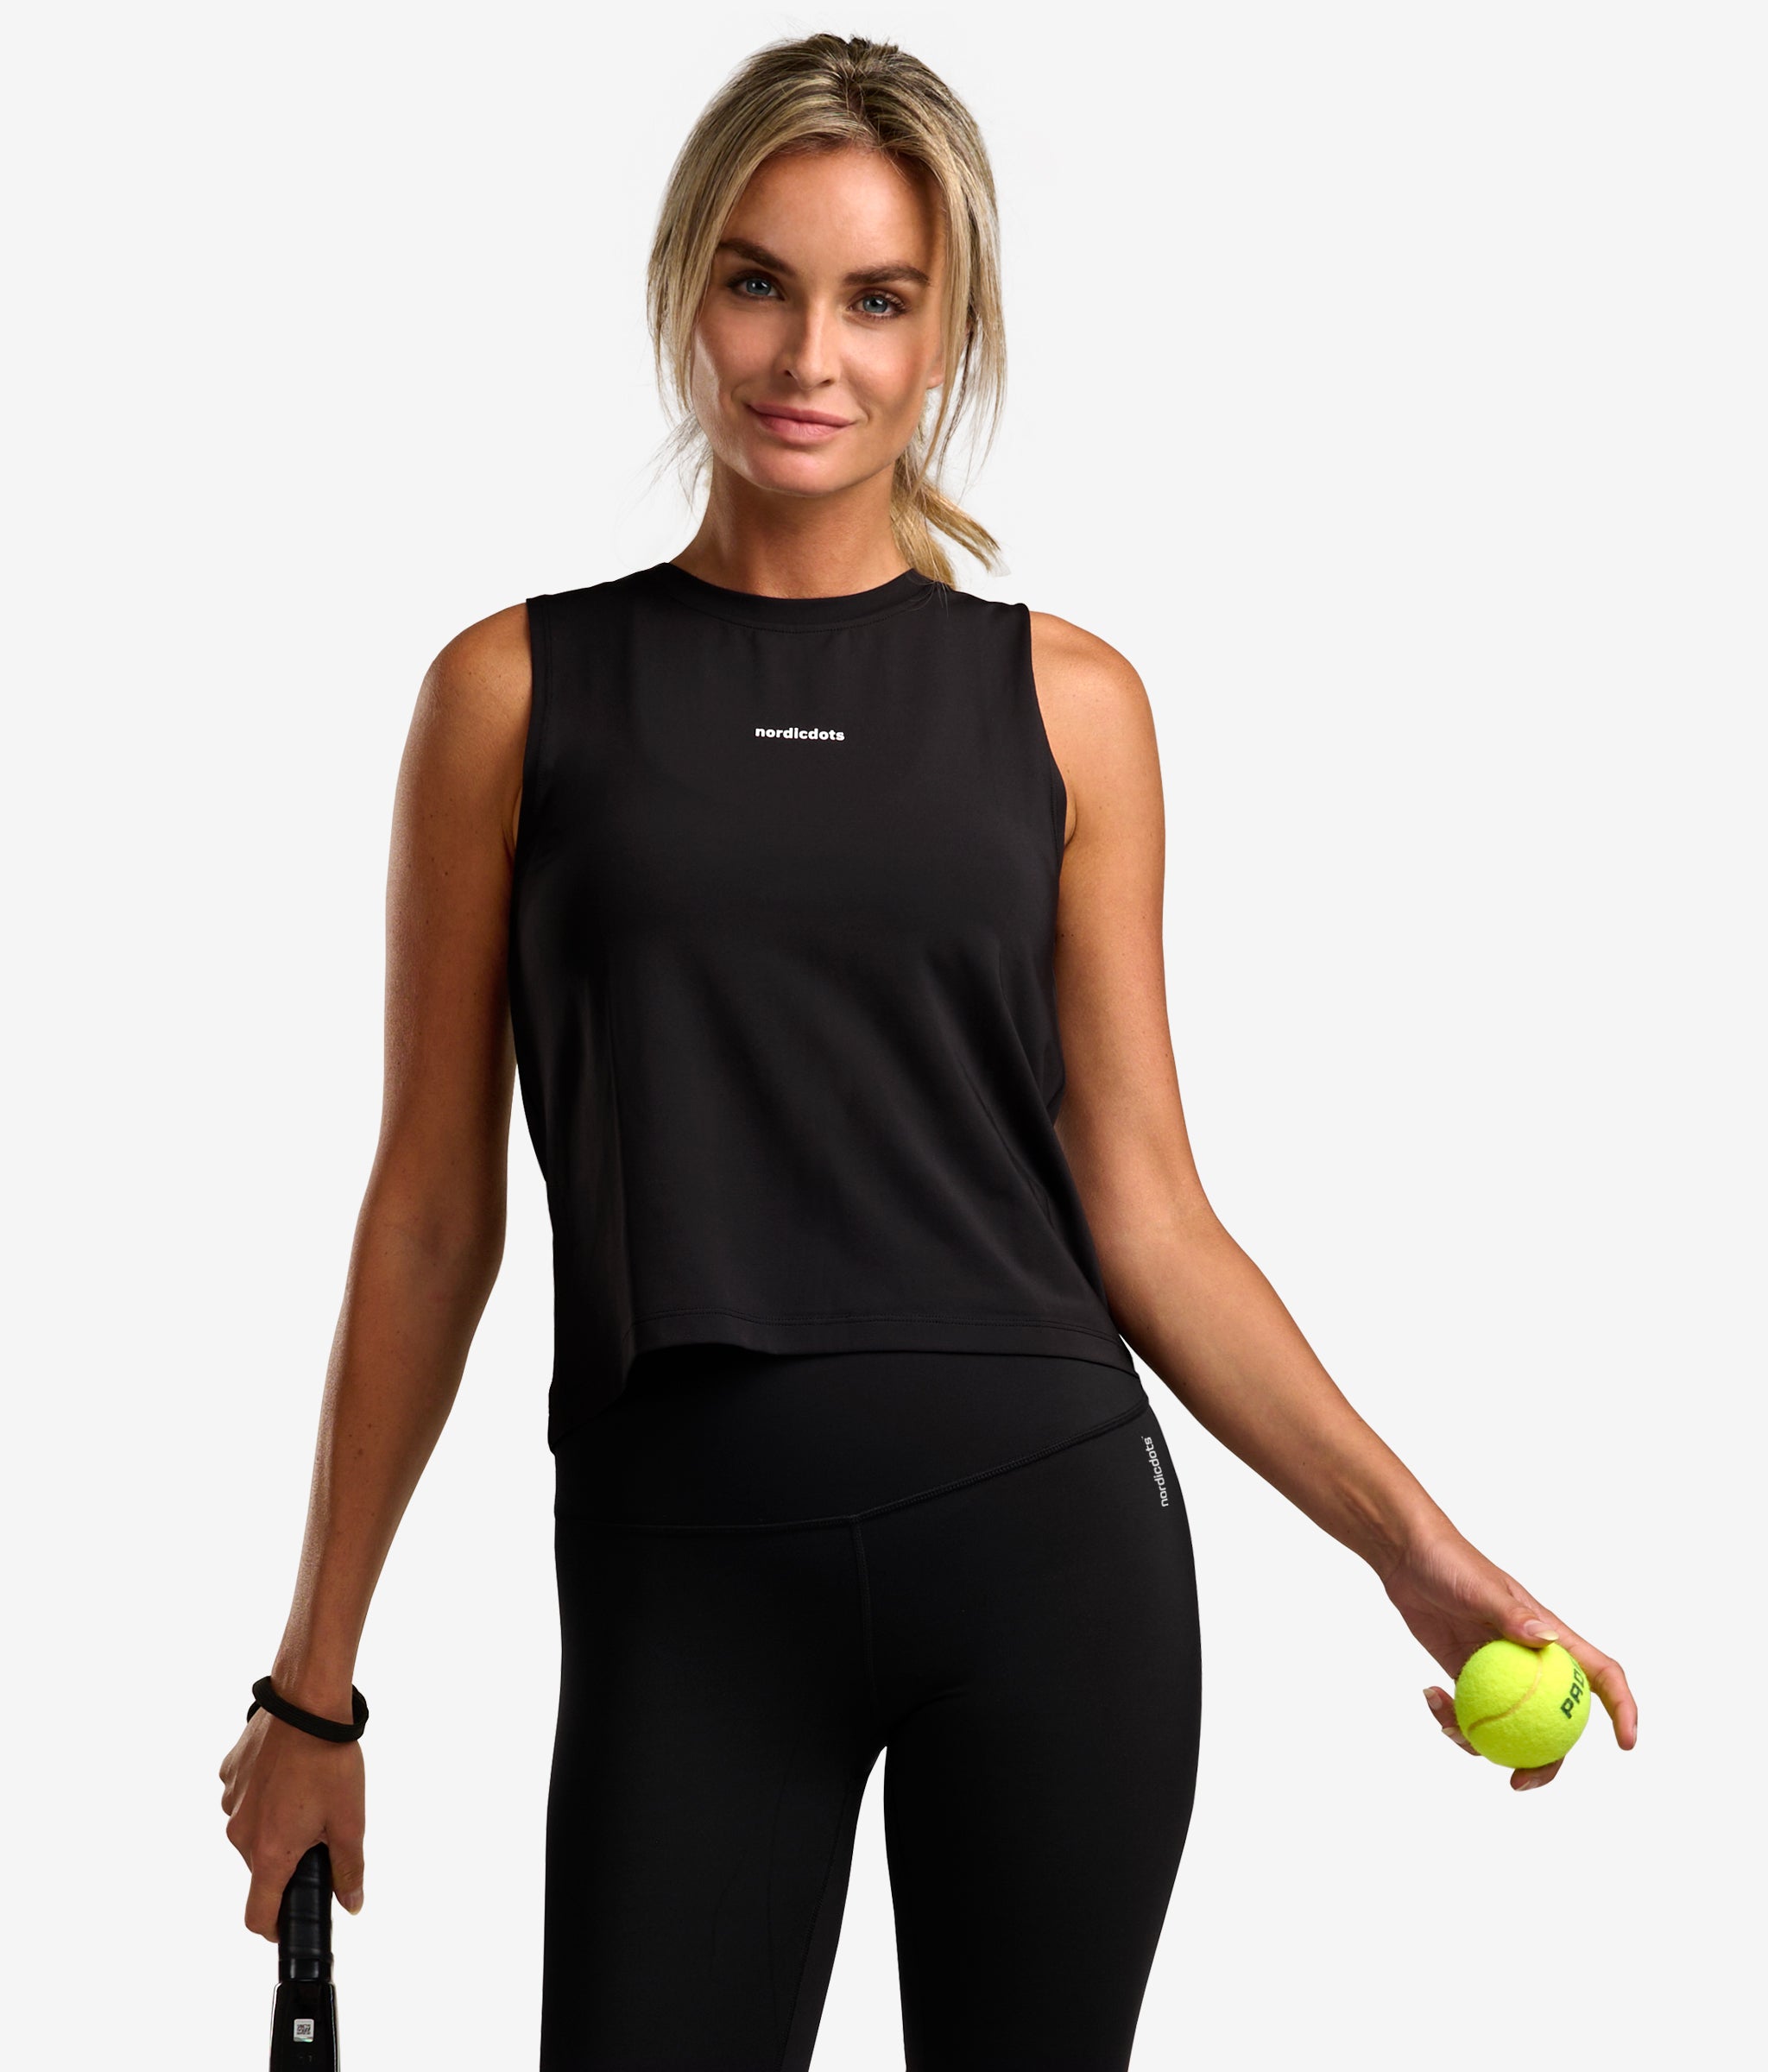 Padel collection, Women, Golf clothing